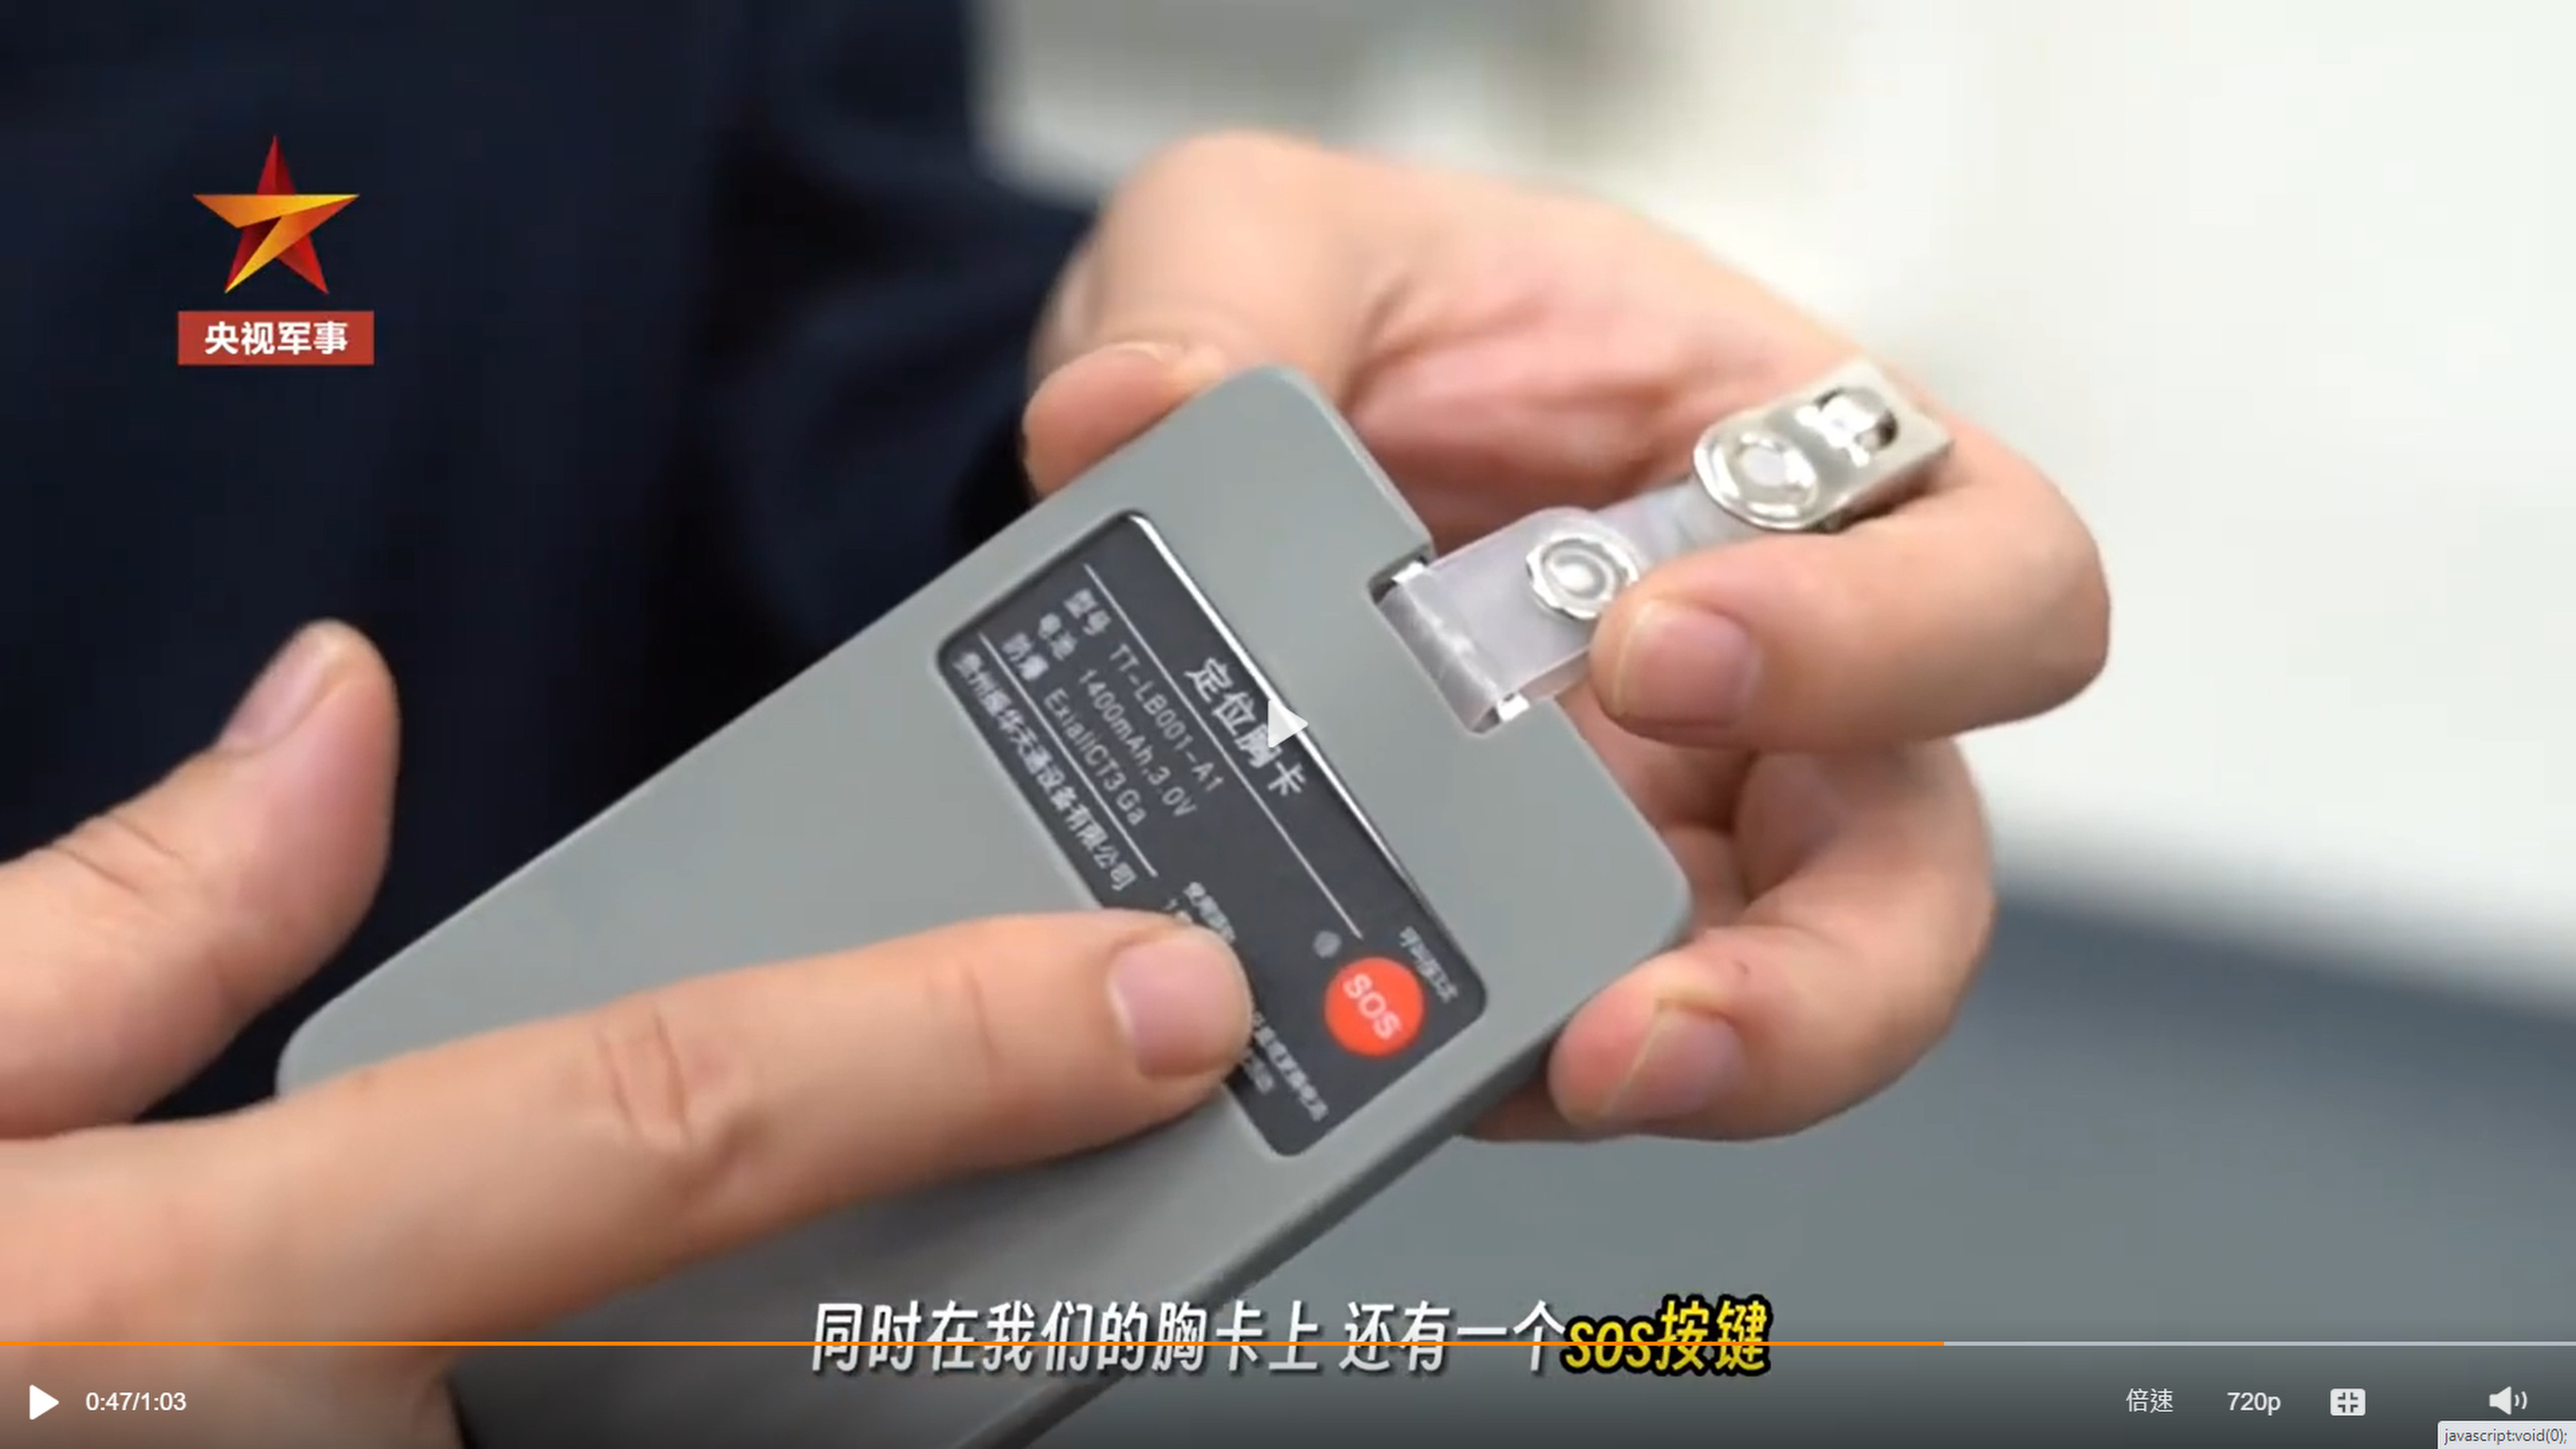 The smart staff card has an SOS button to alert a communications hub if a worker on the Type 075 Hainan amphibious assault ship needs help. Photo: CCTV